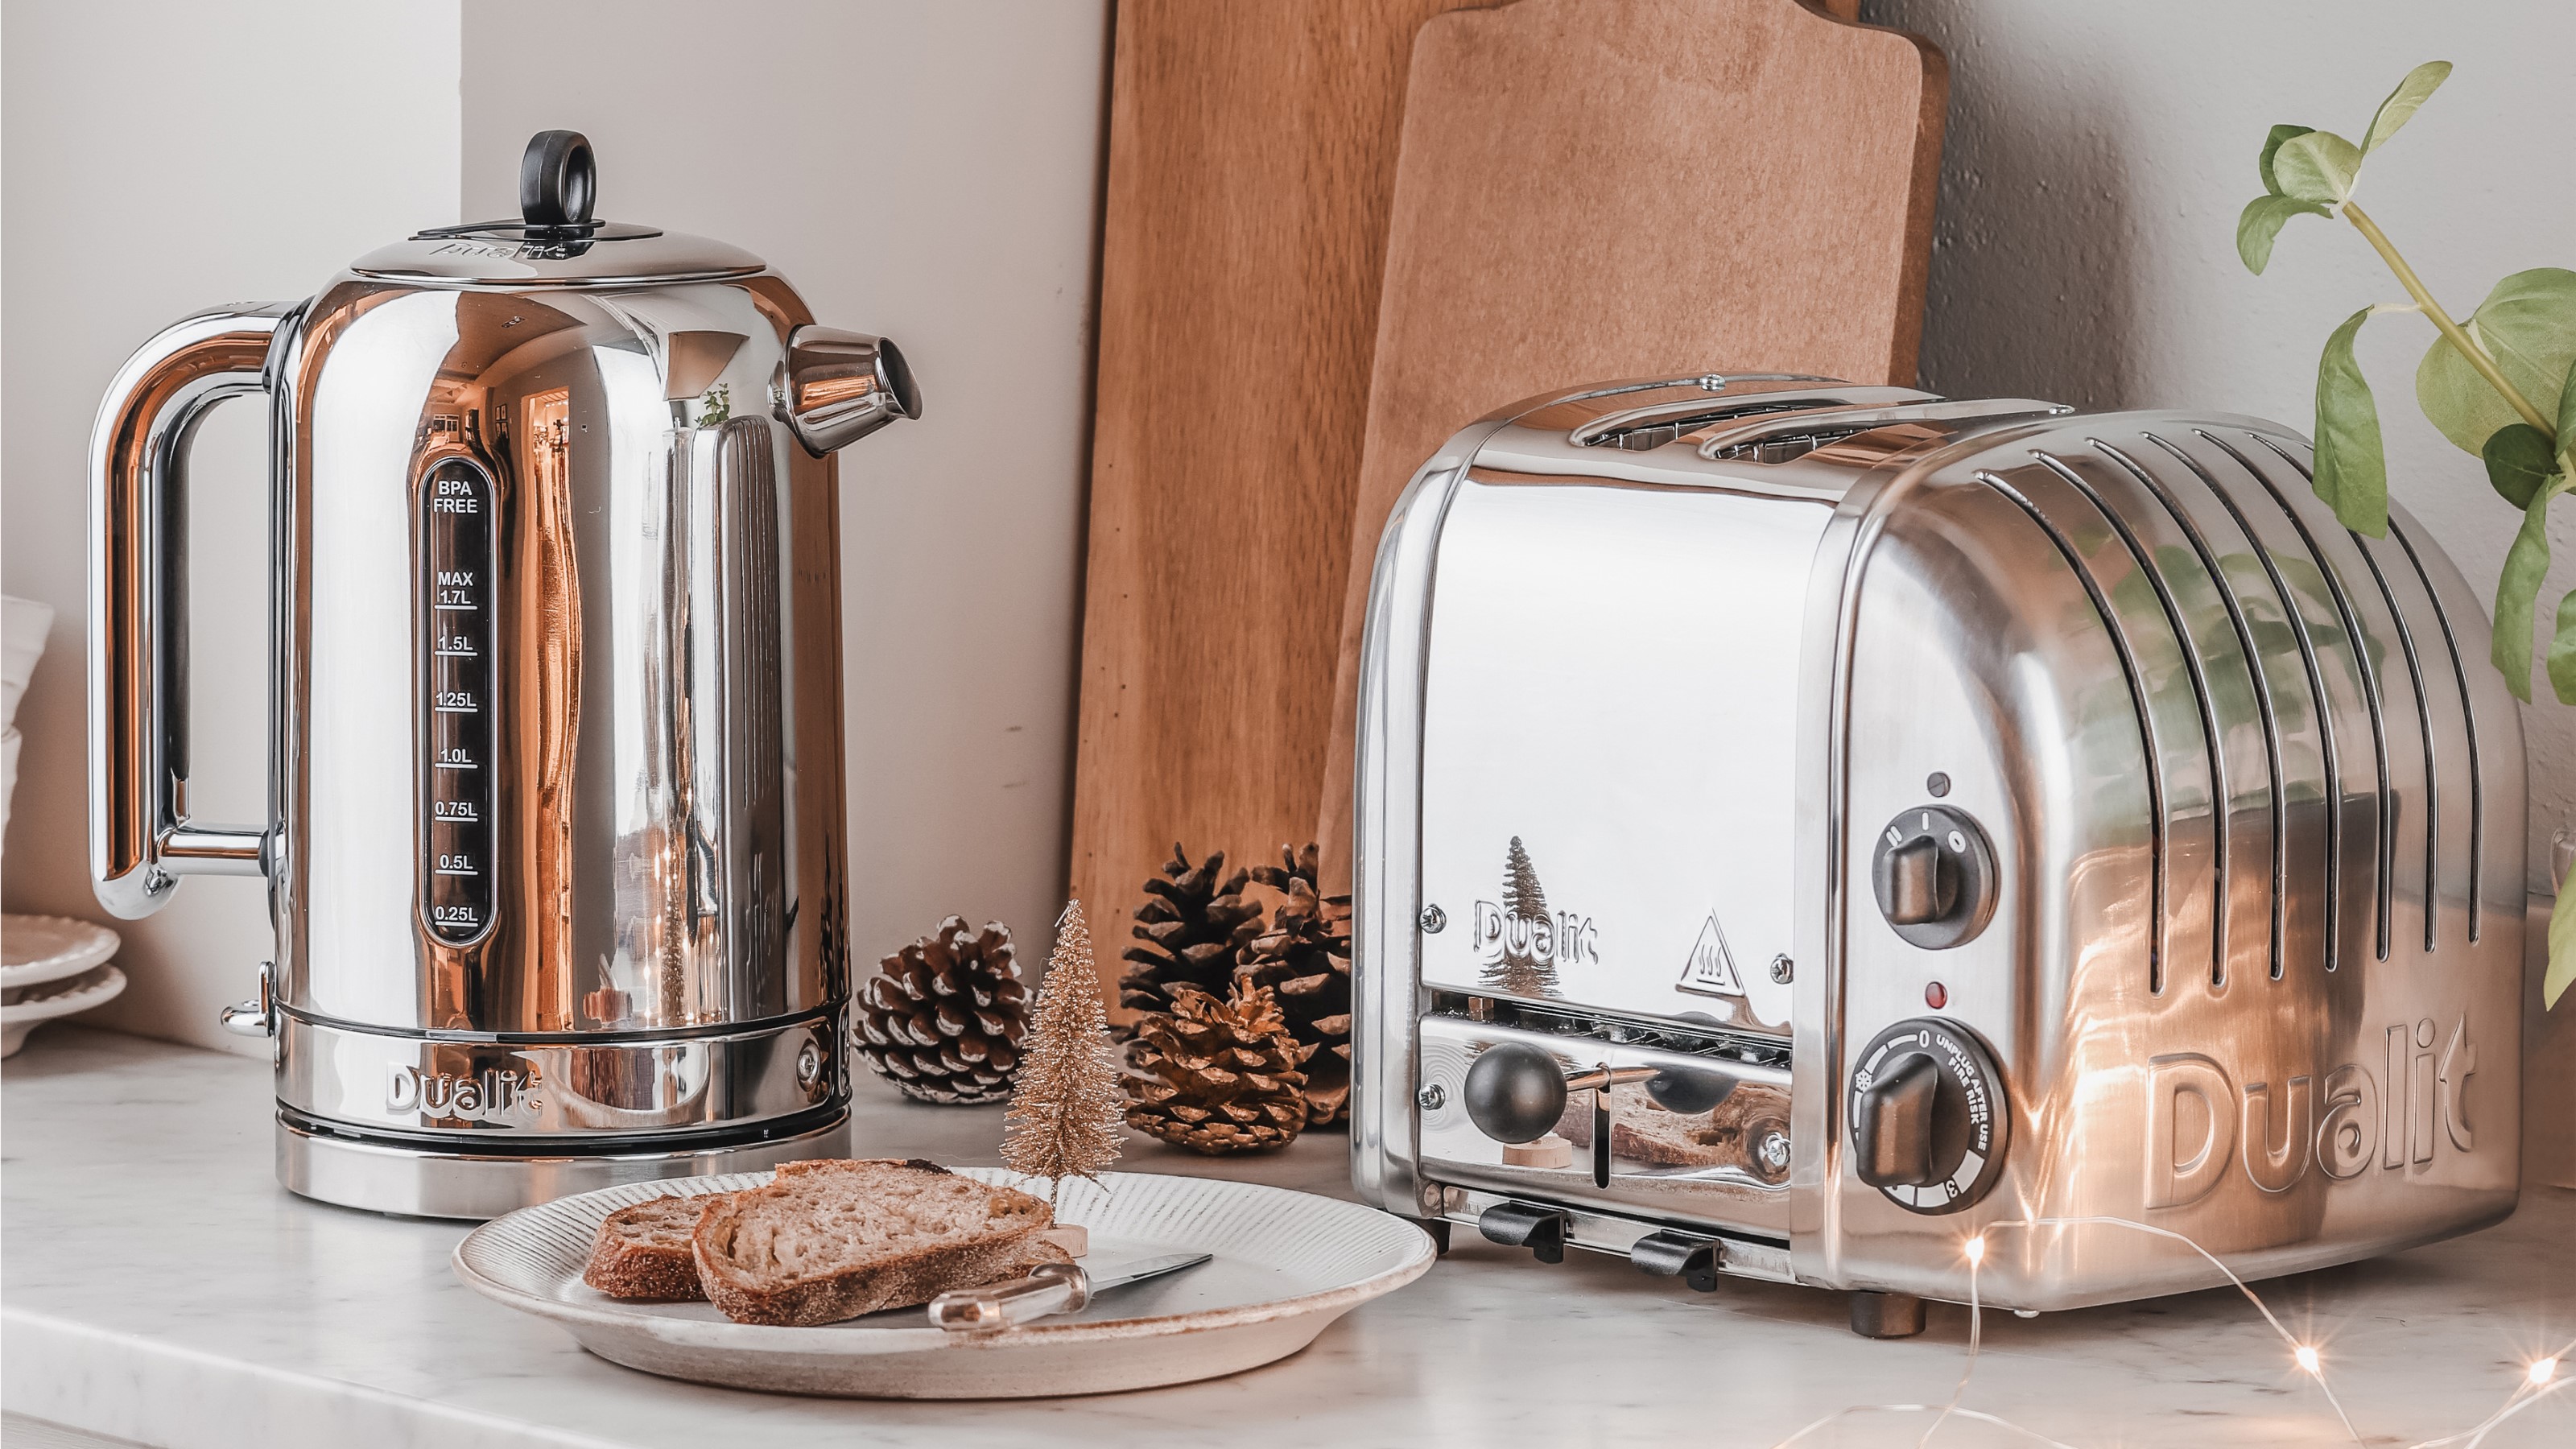 Dualit's Repairable Classic Toaster (Vario) for Sustainable Living 